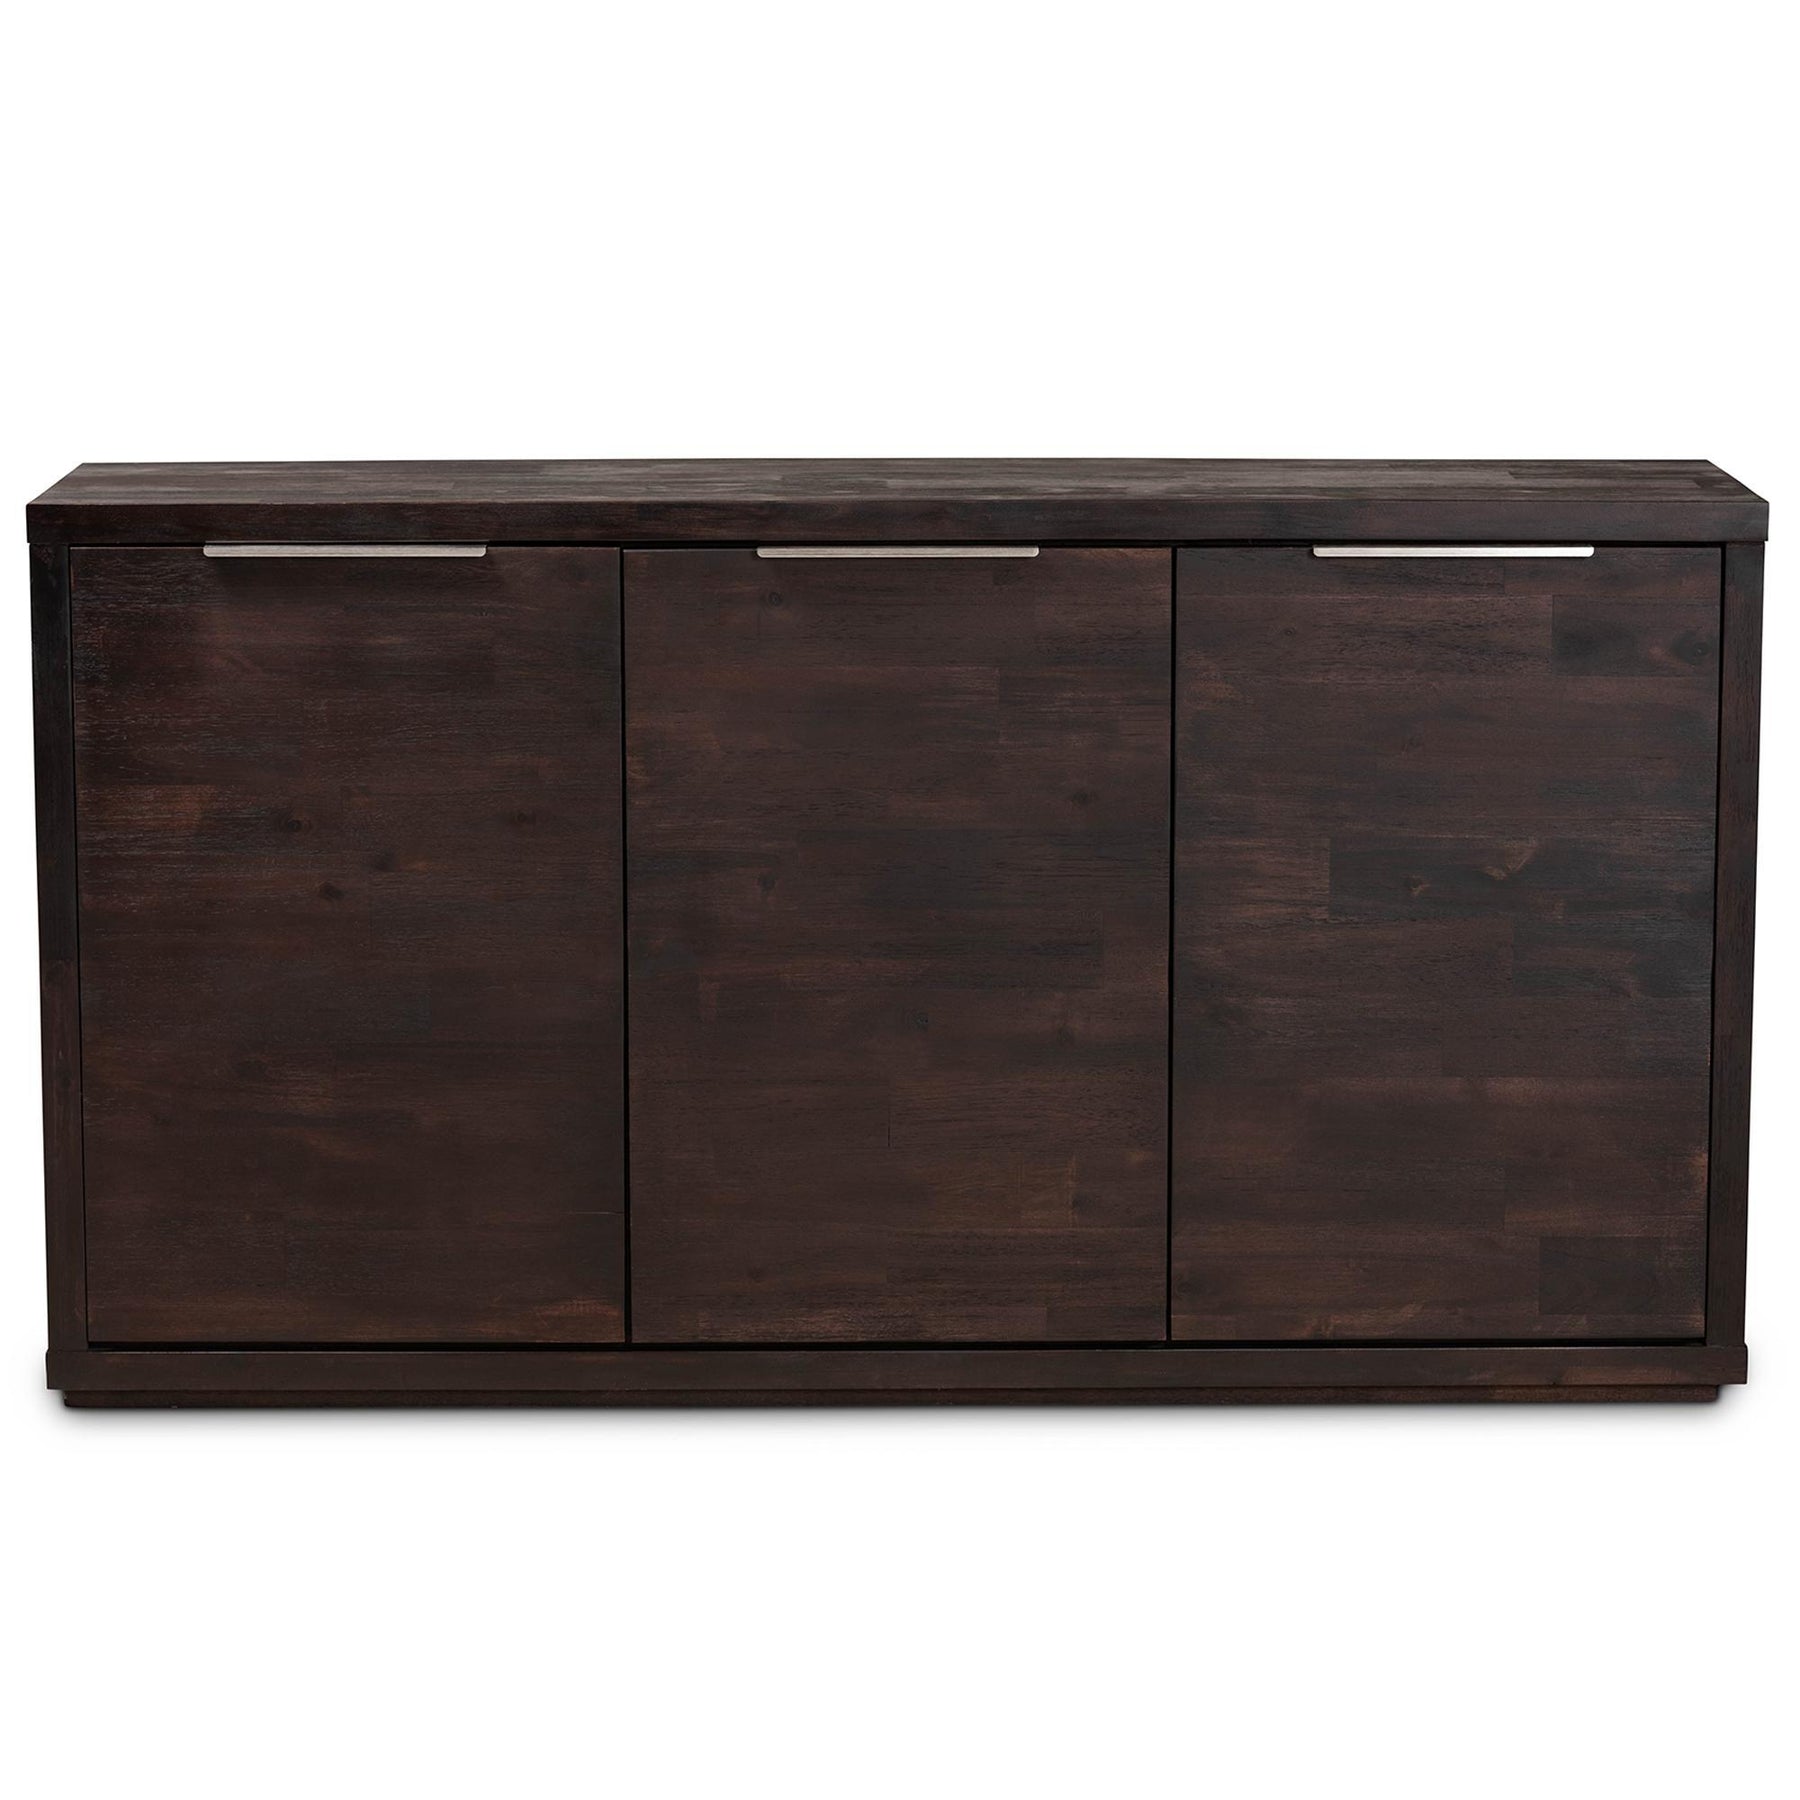 Baxton Studio Titus Modern And Contemporary Dark Brown Finished Wood 3-Door Dining Room Sideboard Buffet  - Titus-Mocha-Sideboard